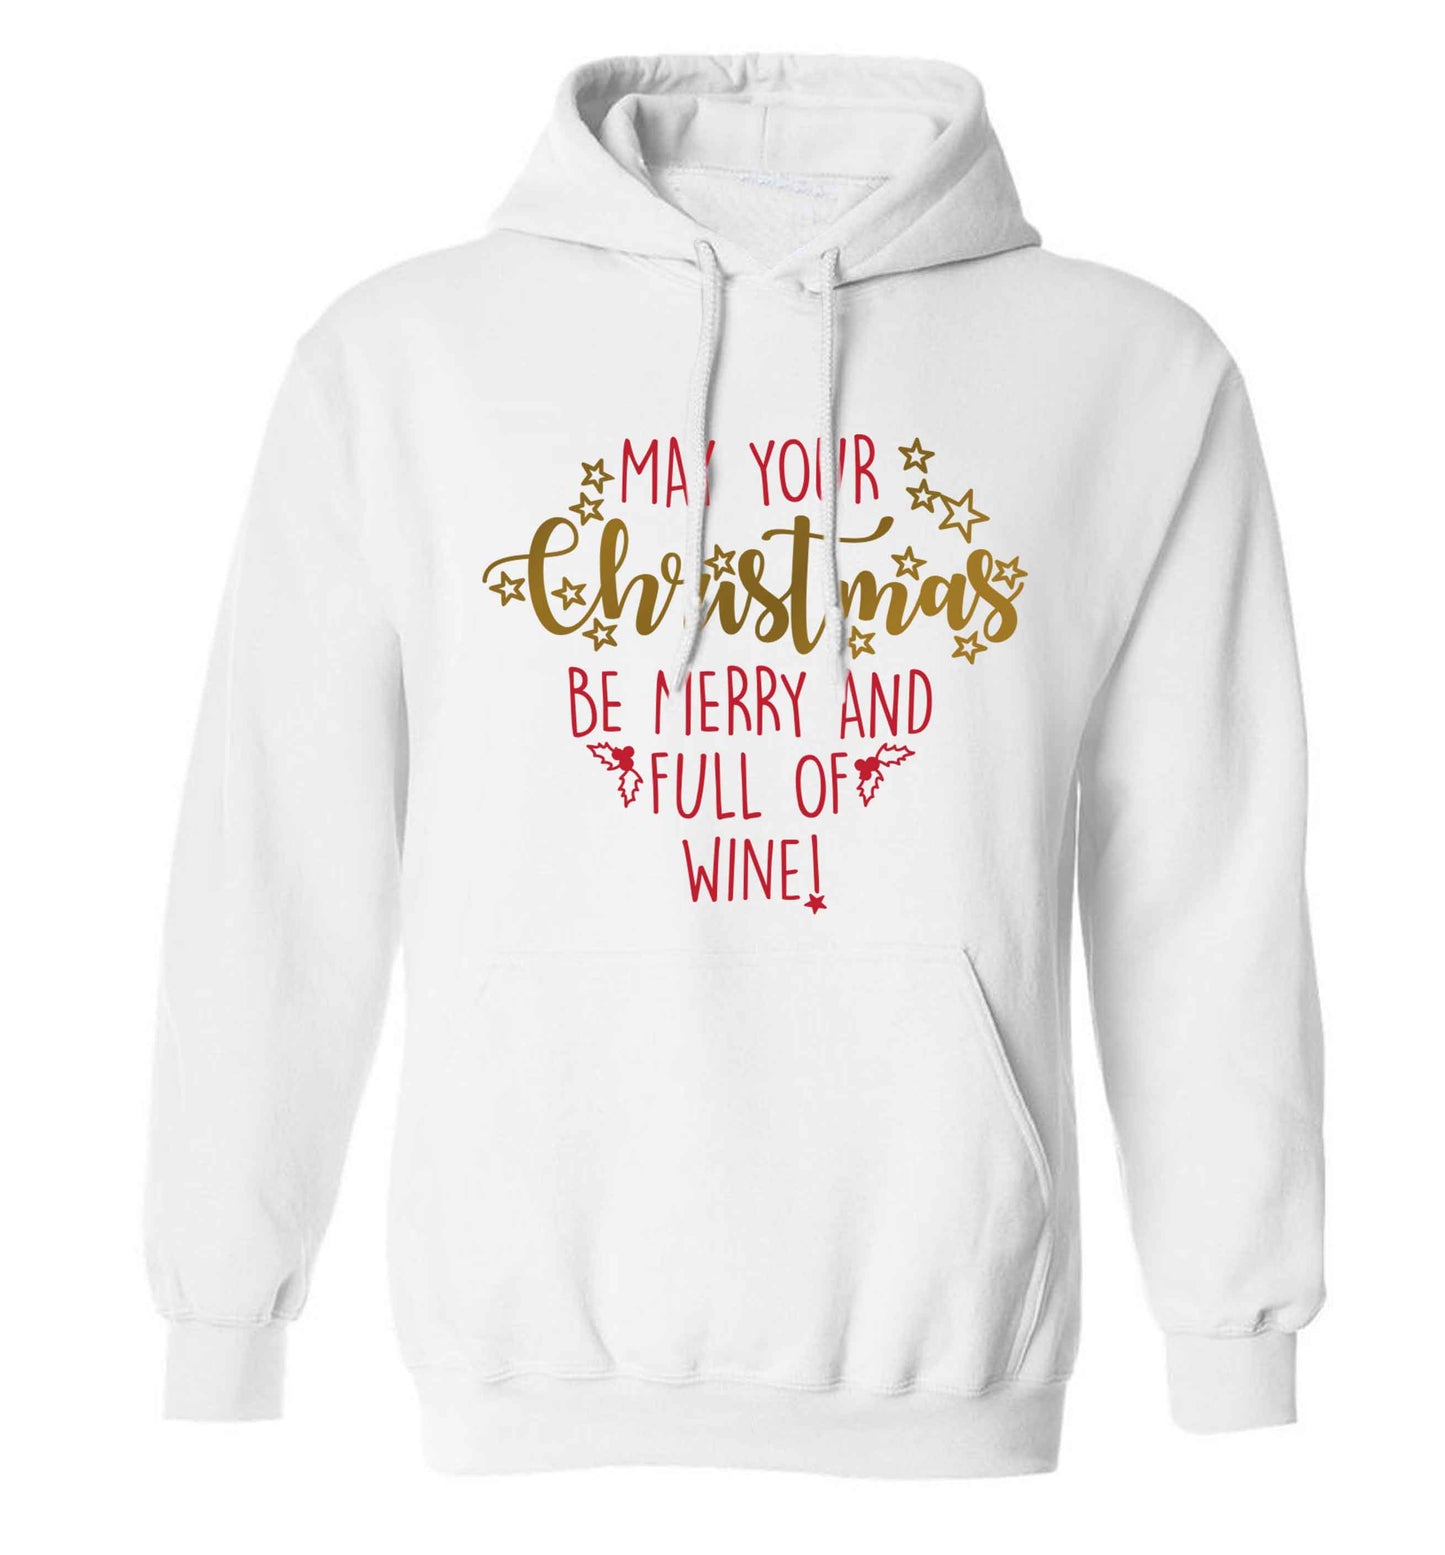 May your Christmas be merry and full of wine adults unisex white hoodie 2XL